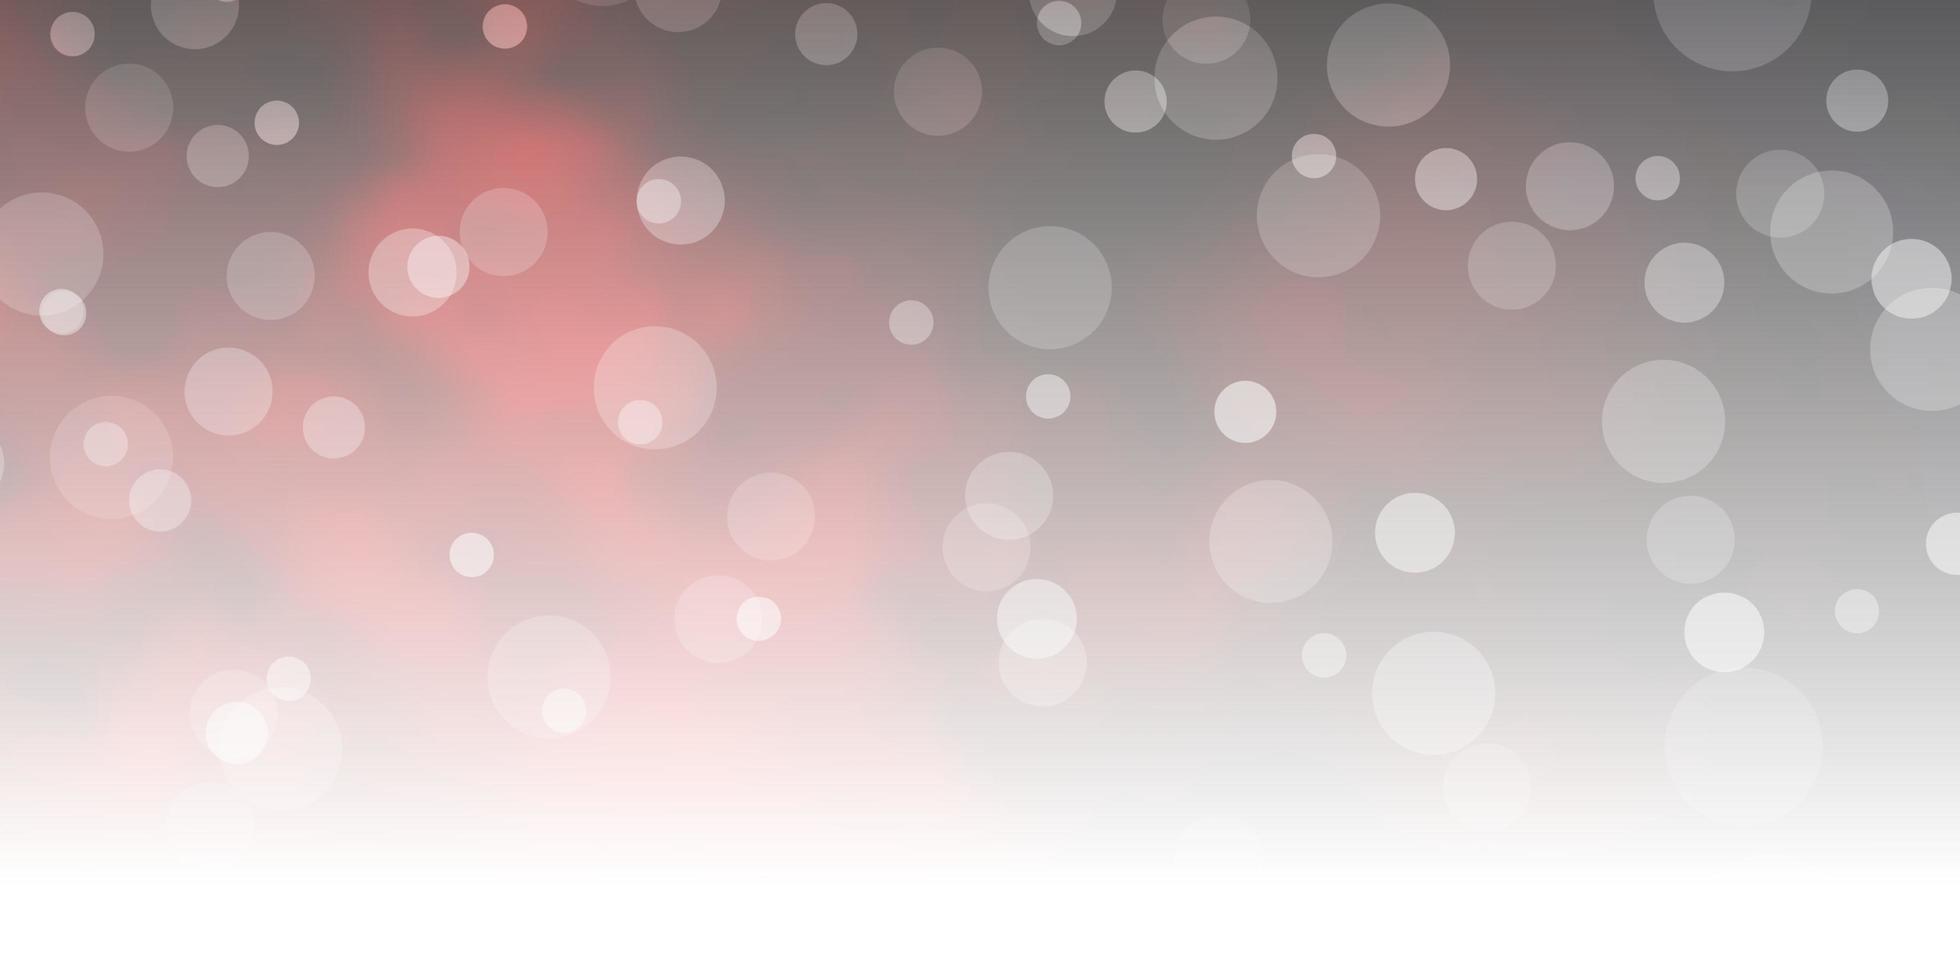 Red template with circles. vector